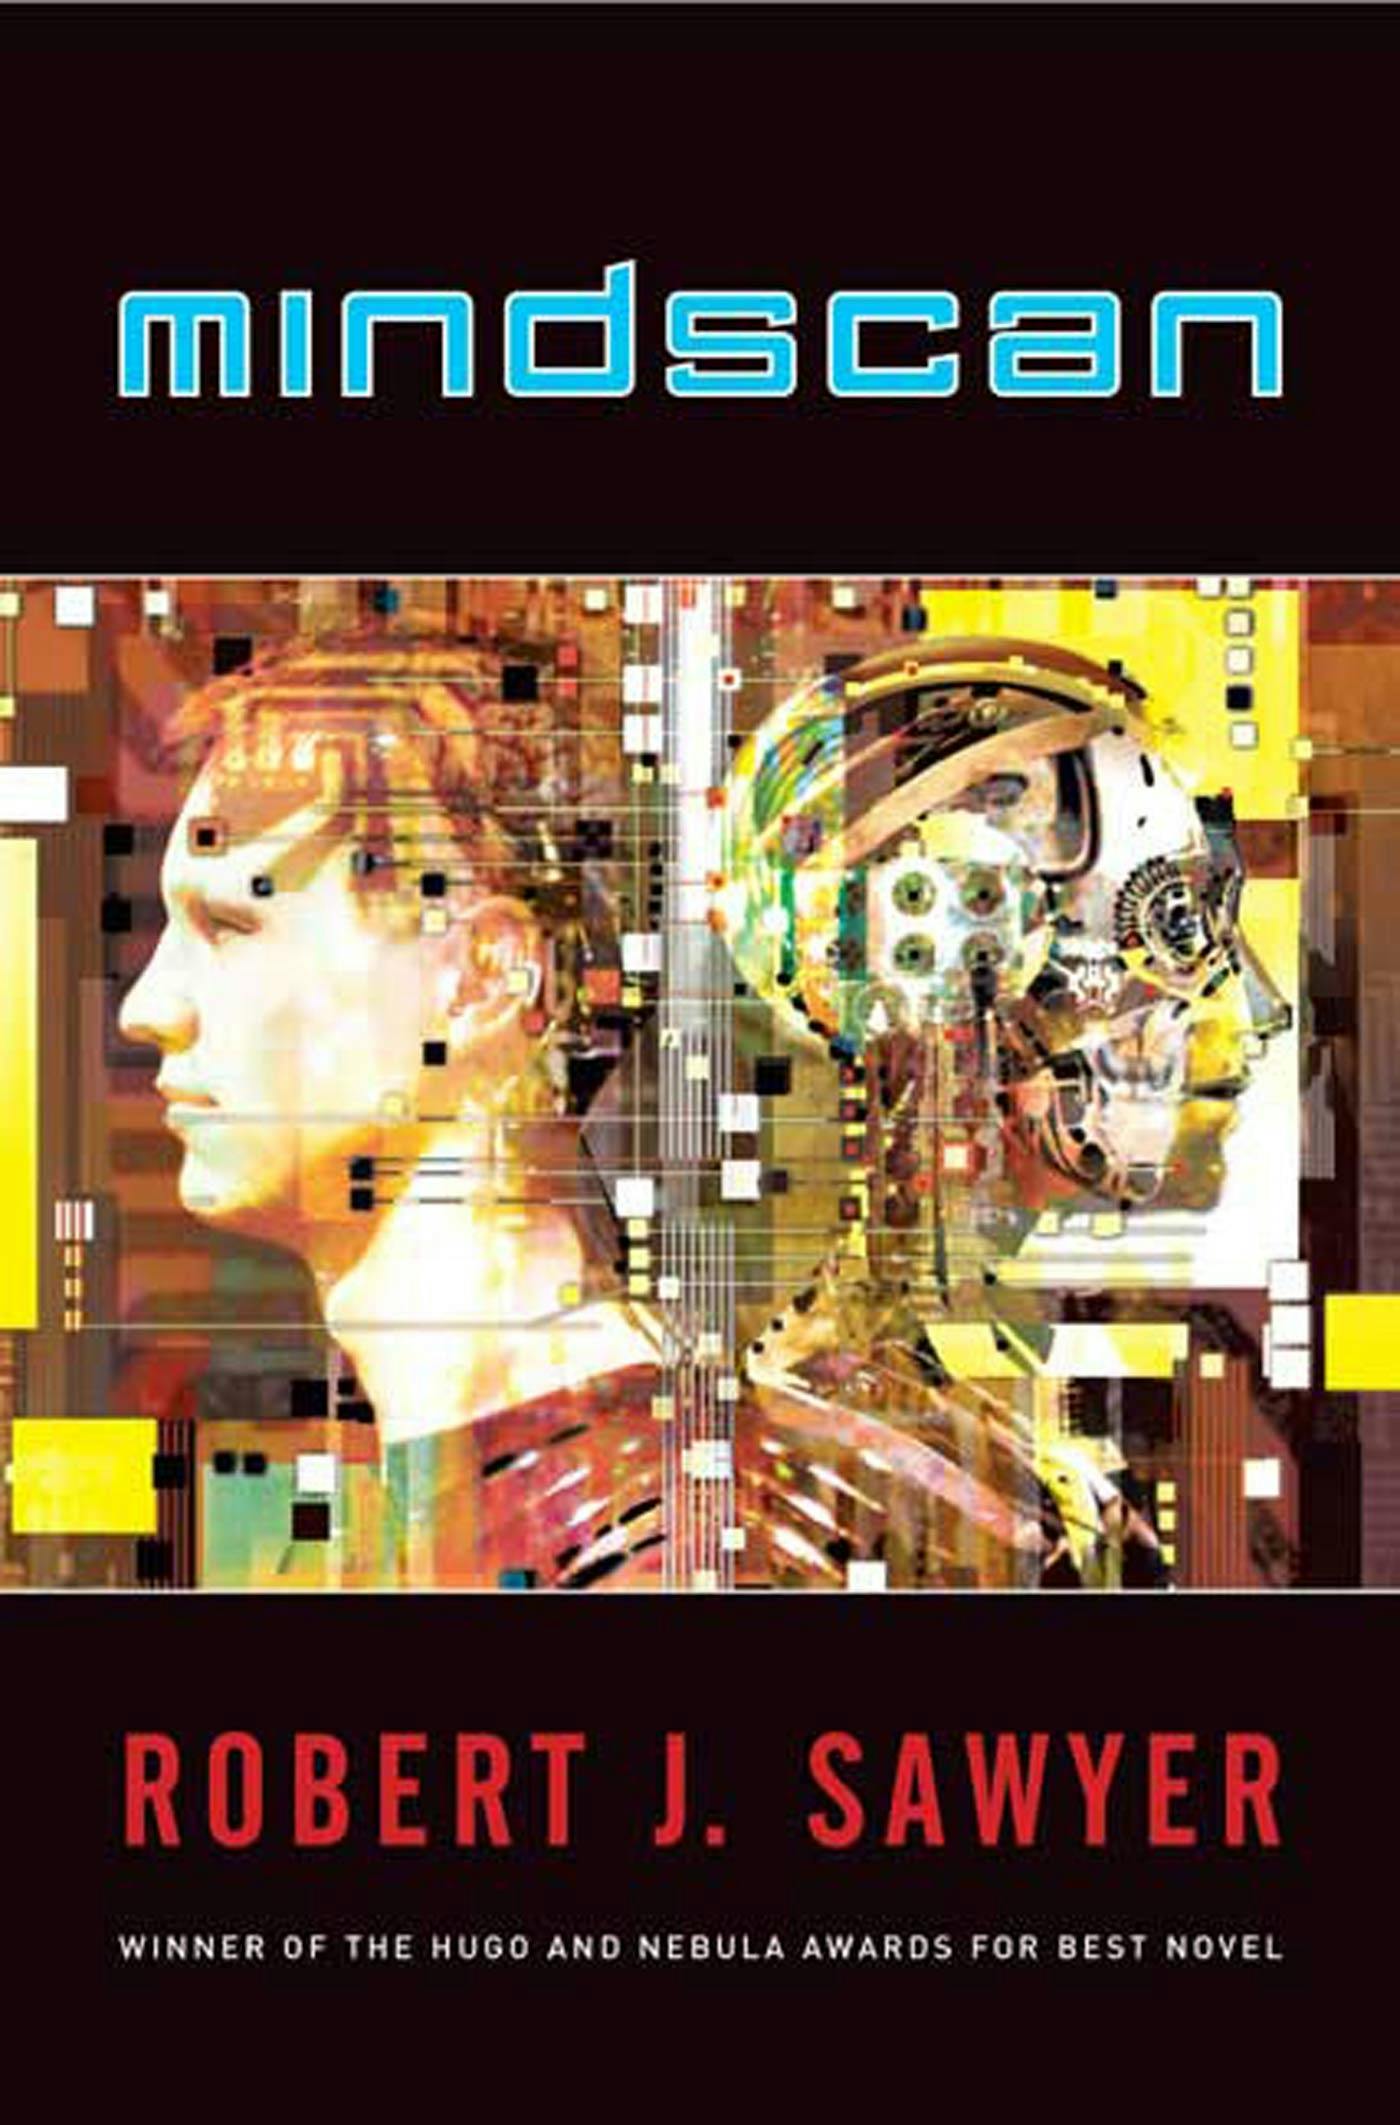 Cover for the book titled as: Mindscan